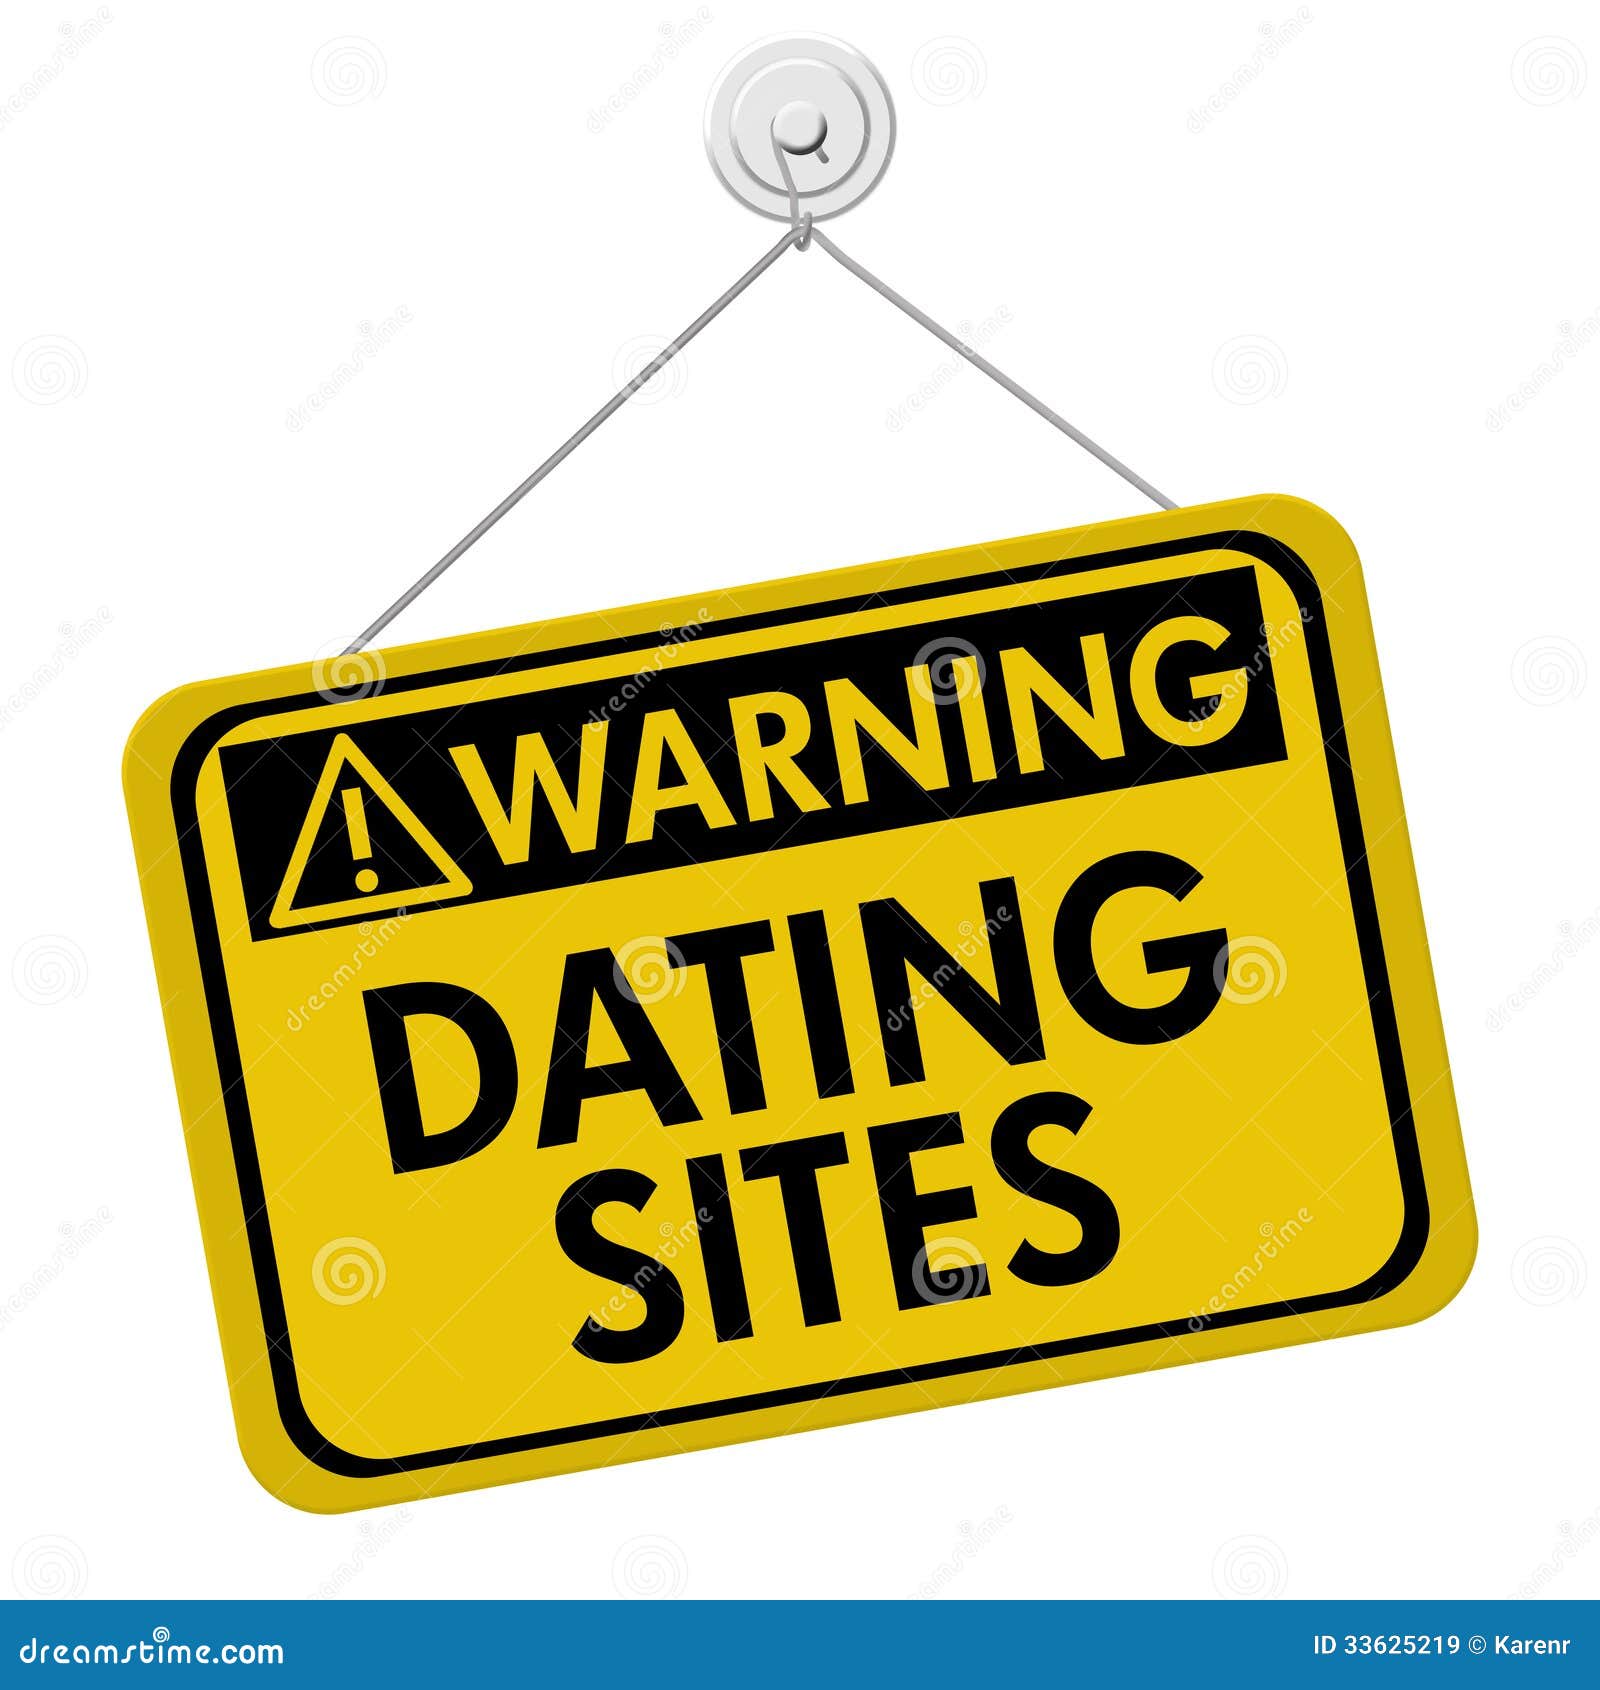 dating site warning signs